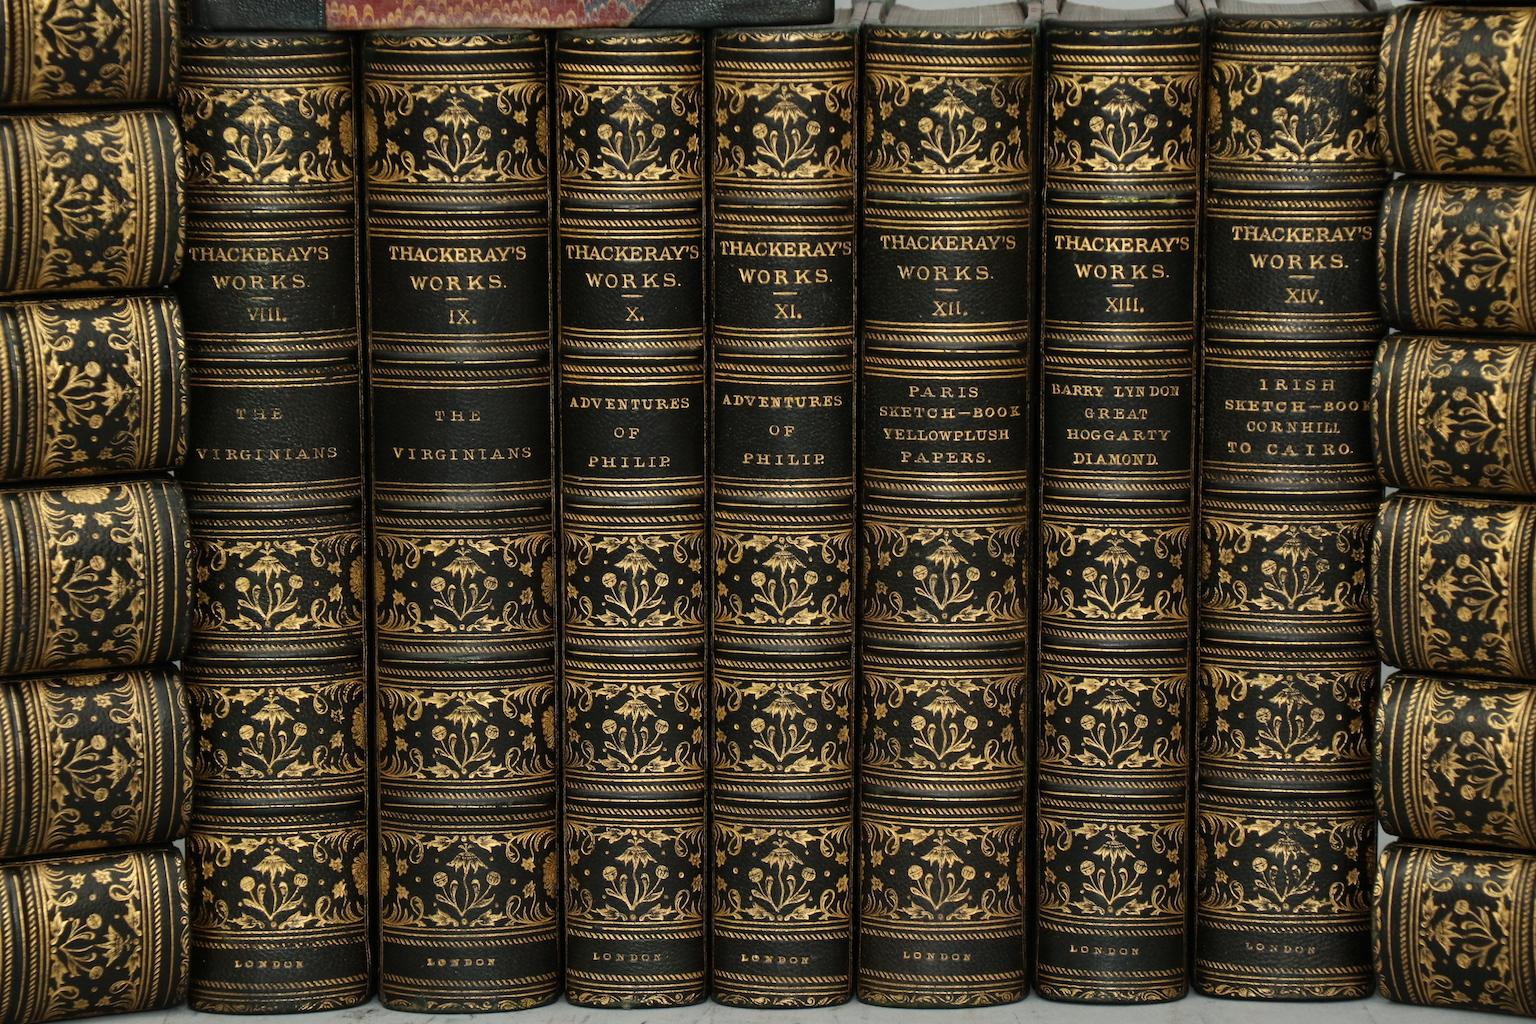 Leatherbound. 22 volumes. Octavo. Bound in half contemporary green morocco with spines gilt with floral and Rococo in compartments, marbled boards and endpapers, & profuse illustration throughout. Very good. Published in London by Smith, Elder, &